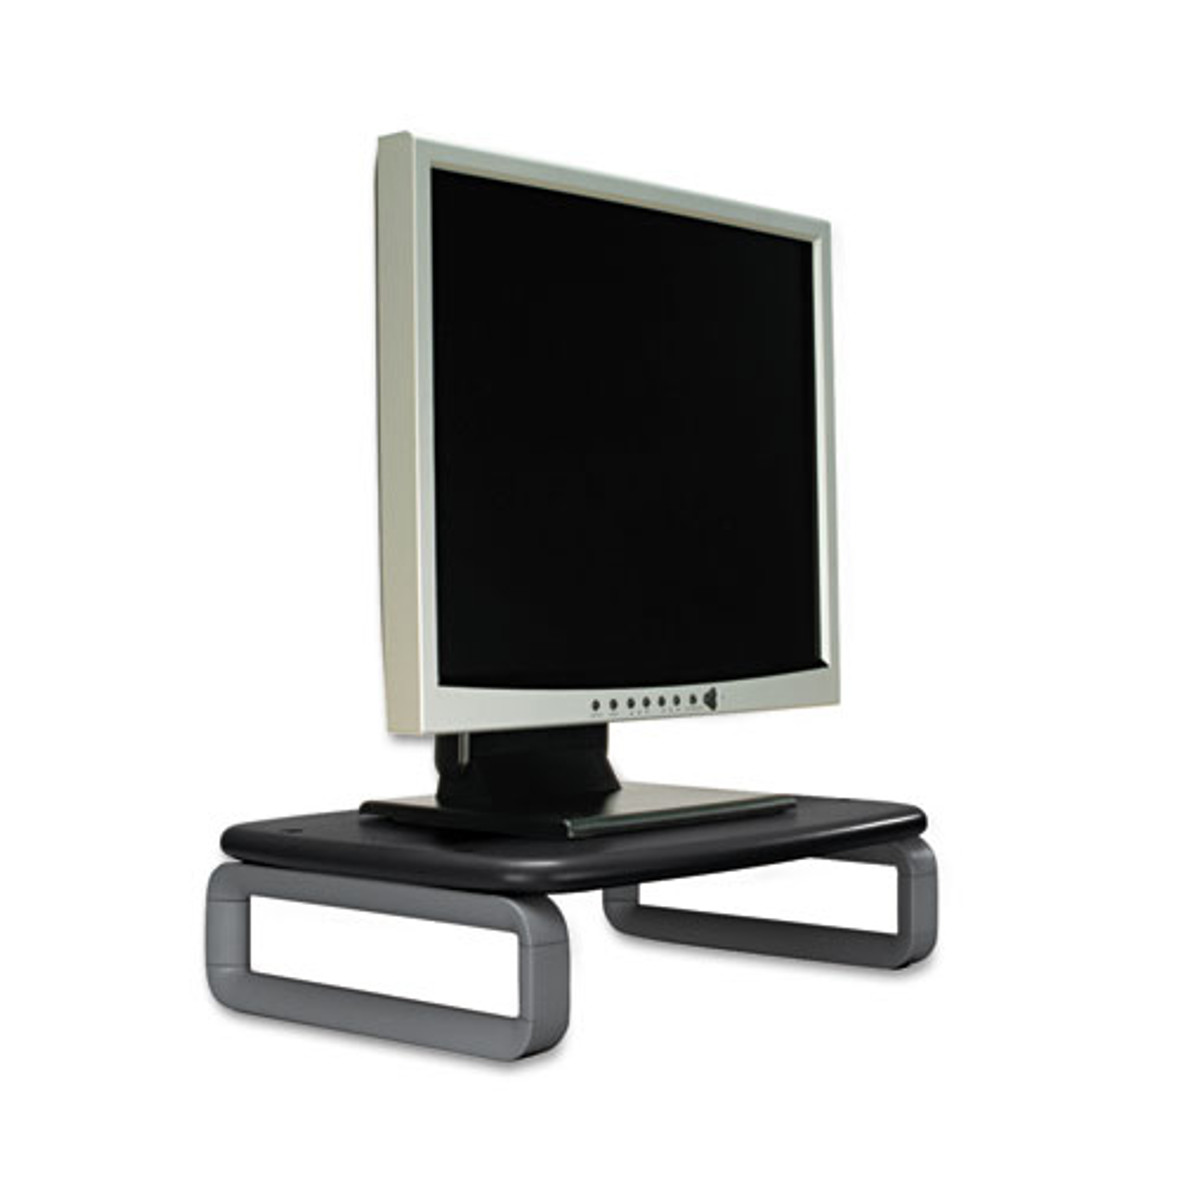 Kensington® Monitor Stand with SmartFit, For 21" Monitors, 11.5" x 9" x 3", Black/Gray